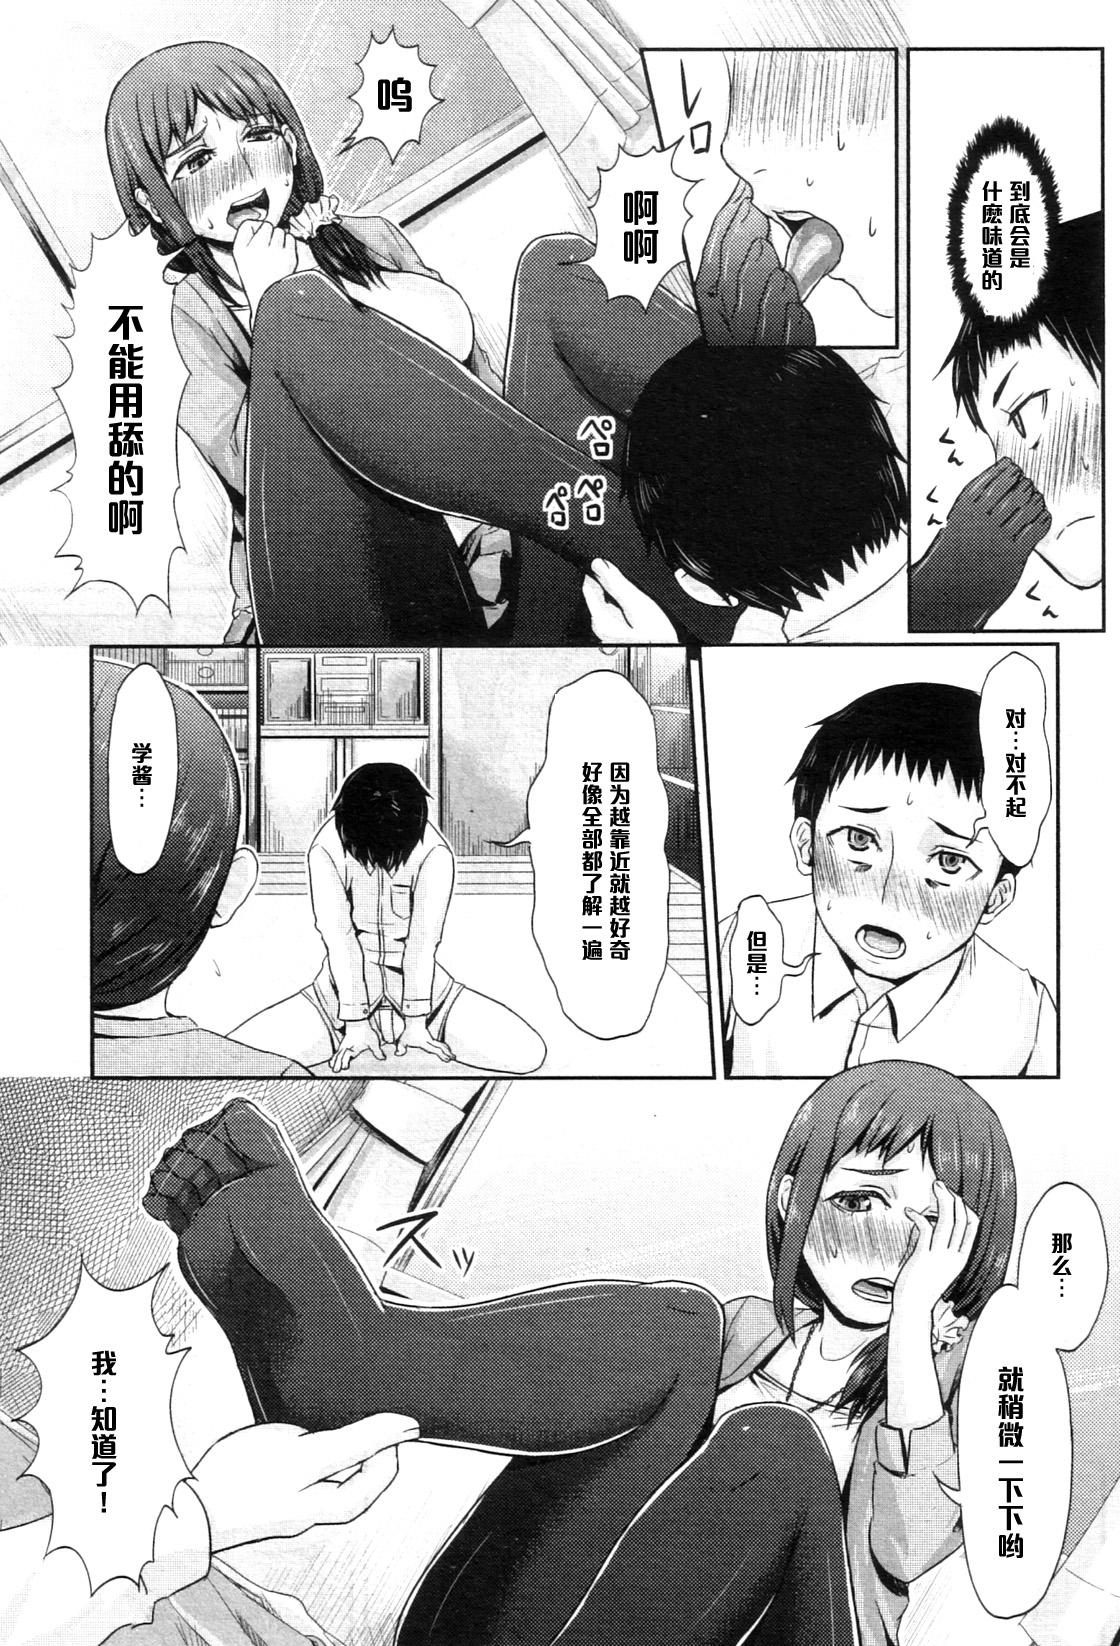 Gros Seins Onee-chan no Stocking Beurette - Page 11